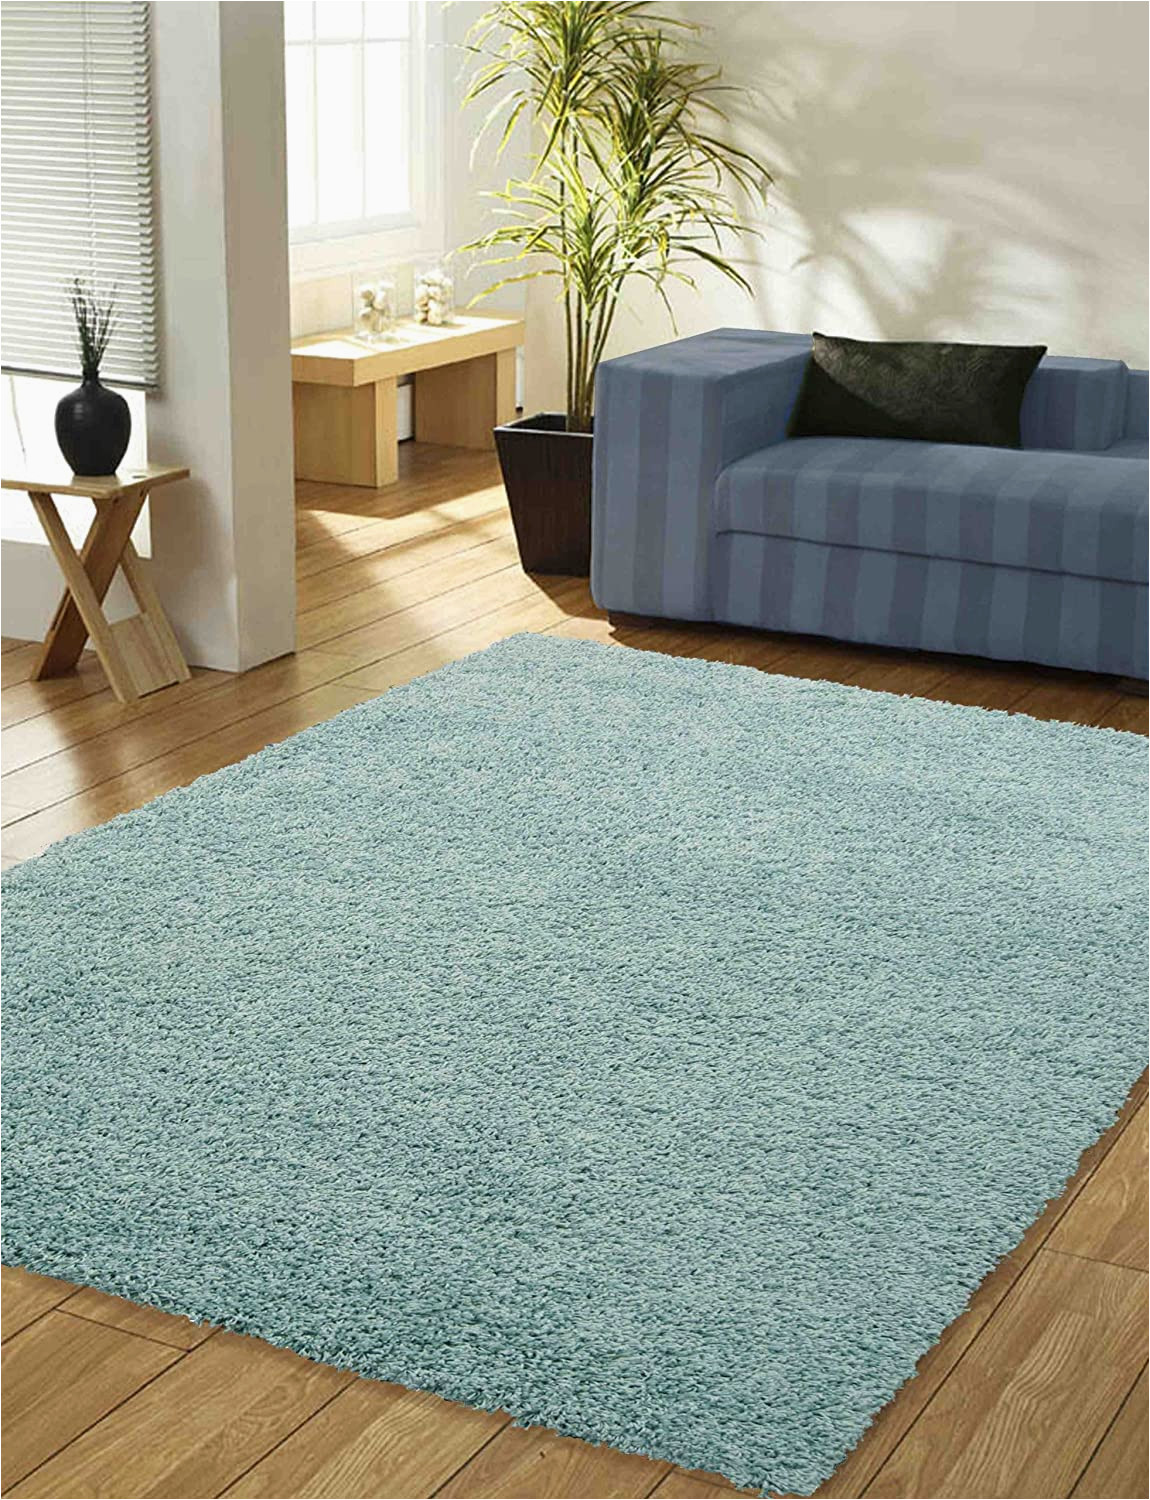 Duck Egg Blue Rug Large Level Duck Egg X Blue Thick Pile Shaggy Rug Value